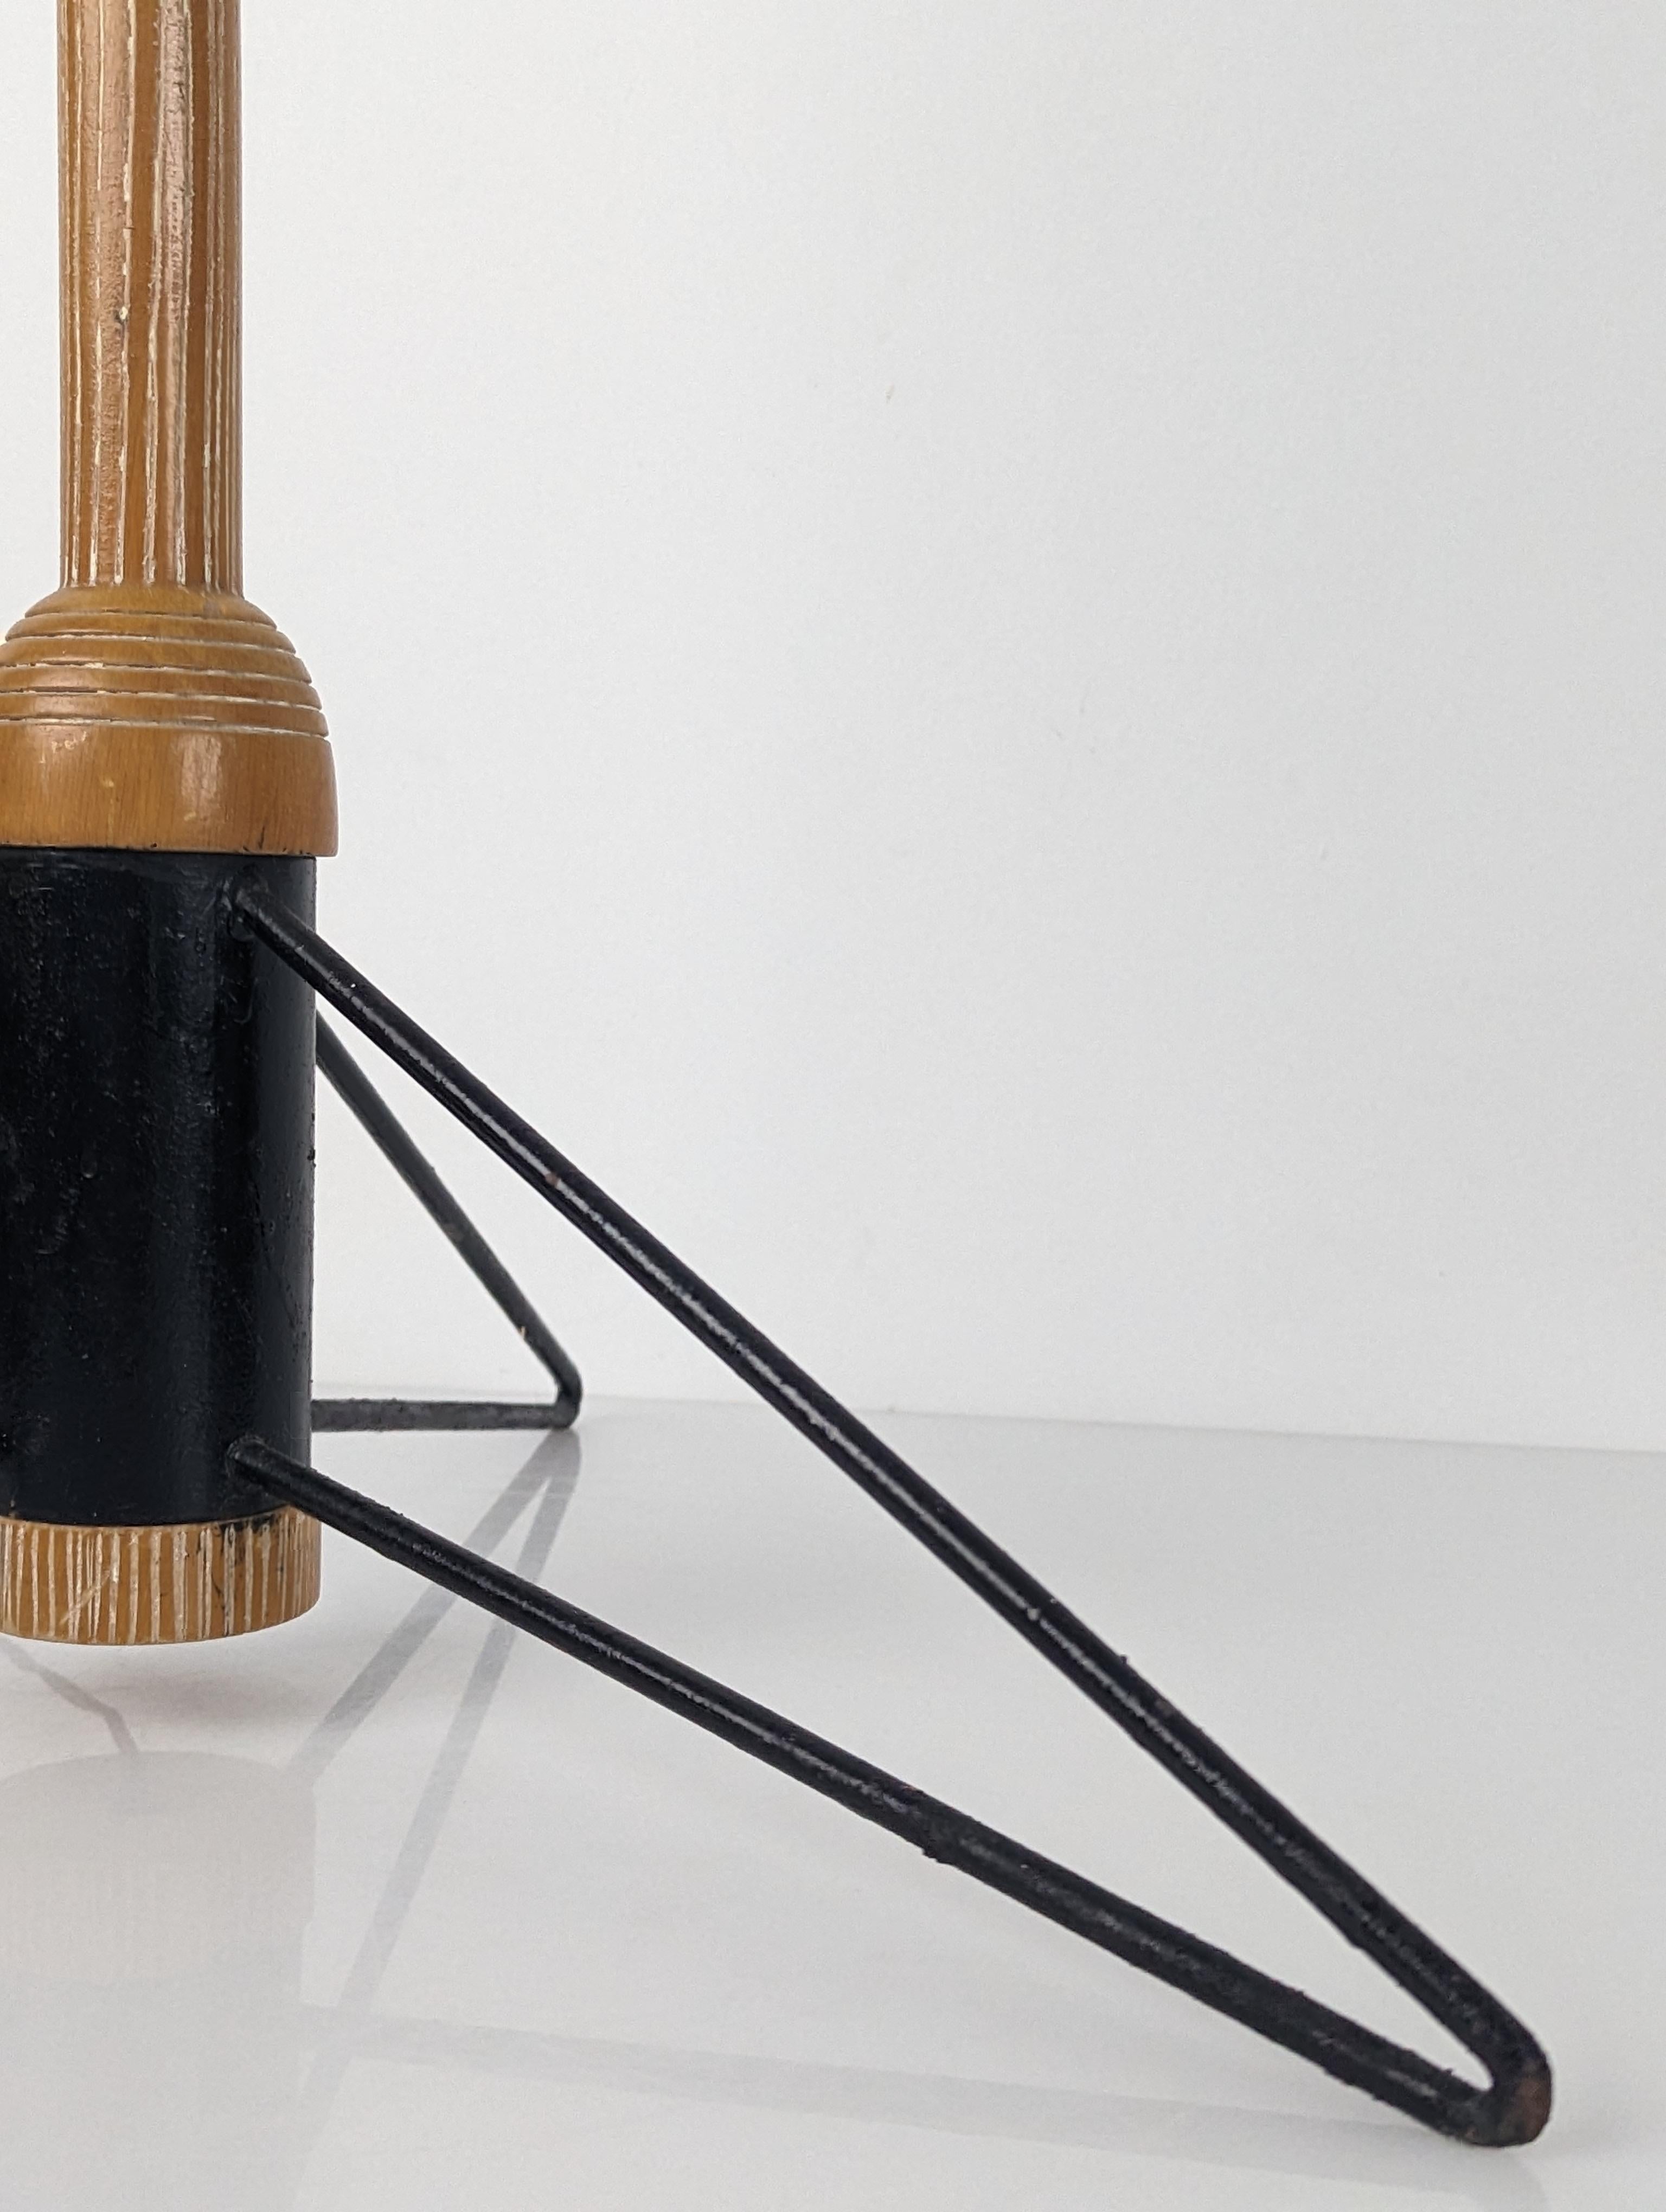 20th Century Midcentury Tripod Floor Lamp in Iron and Wood, 1950s For Sale